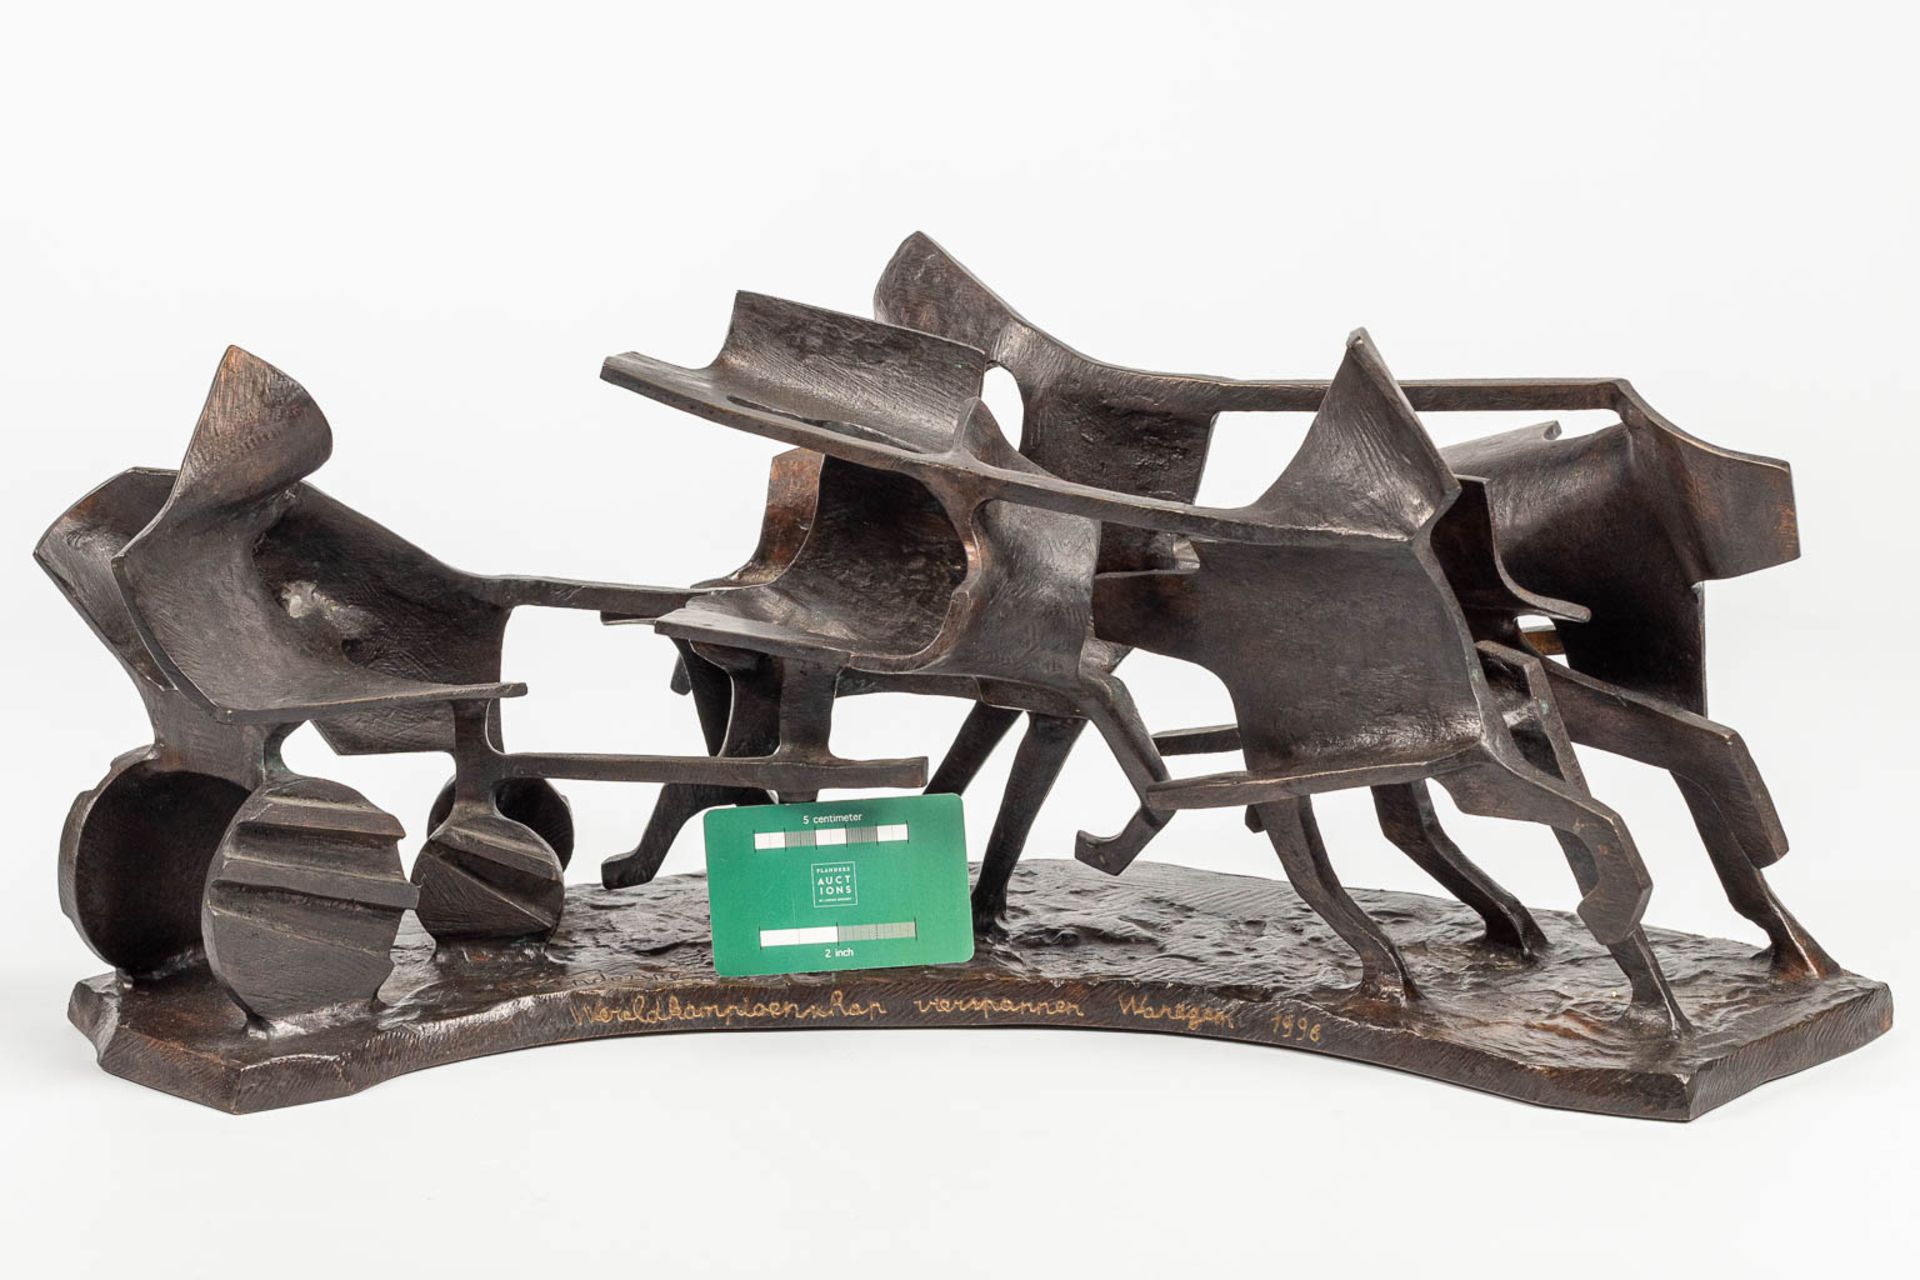 Fernand VANDERPLANCKE (1938) 'Vierspan' an abstract bronze statue of a horse-drawn carriage - Image 9 of 12